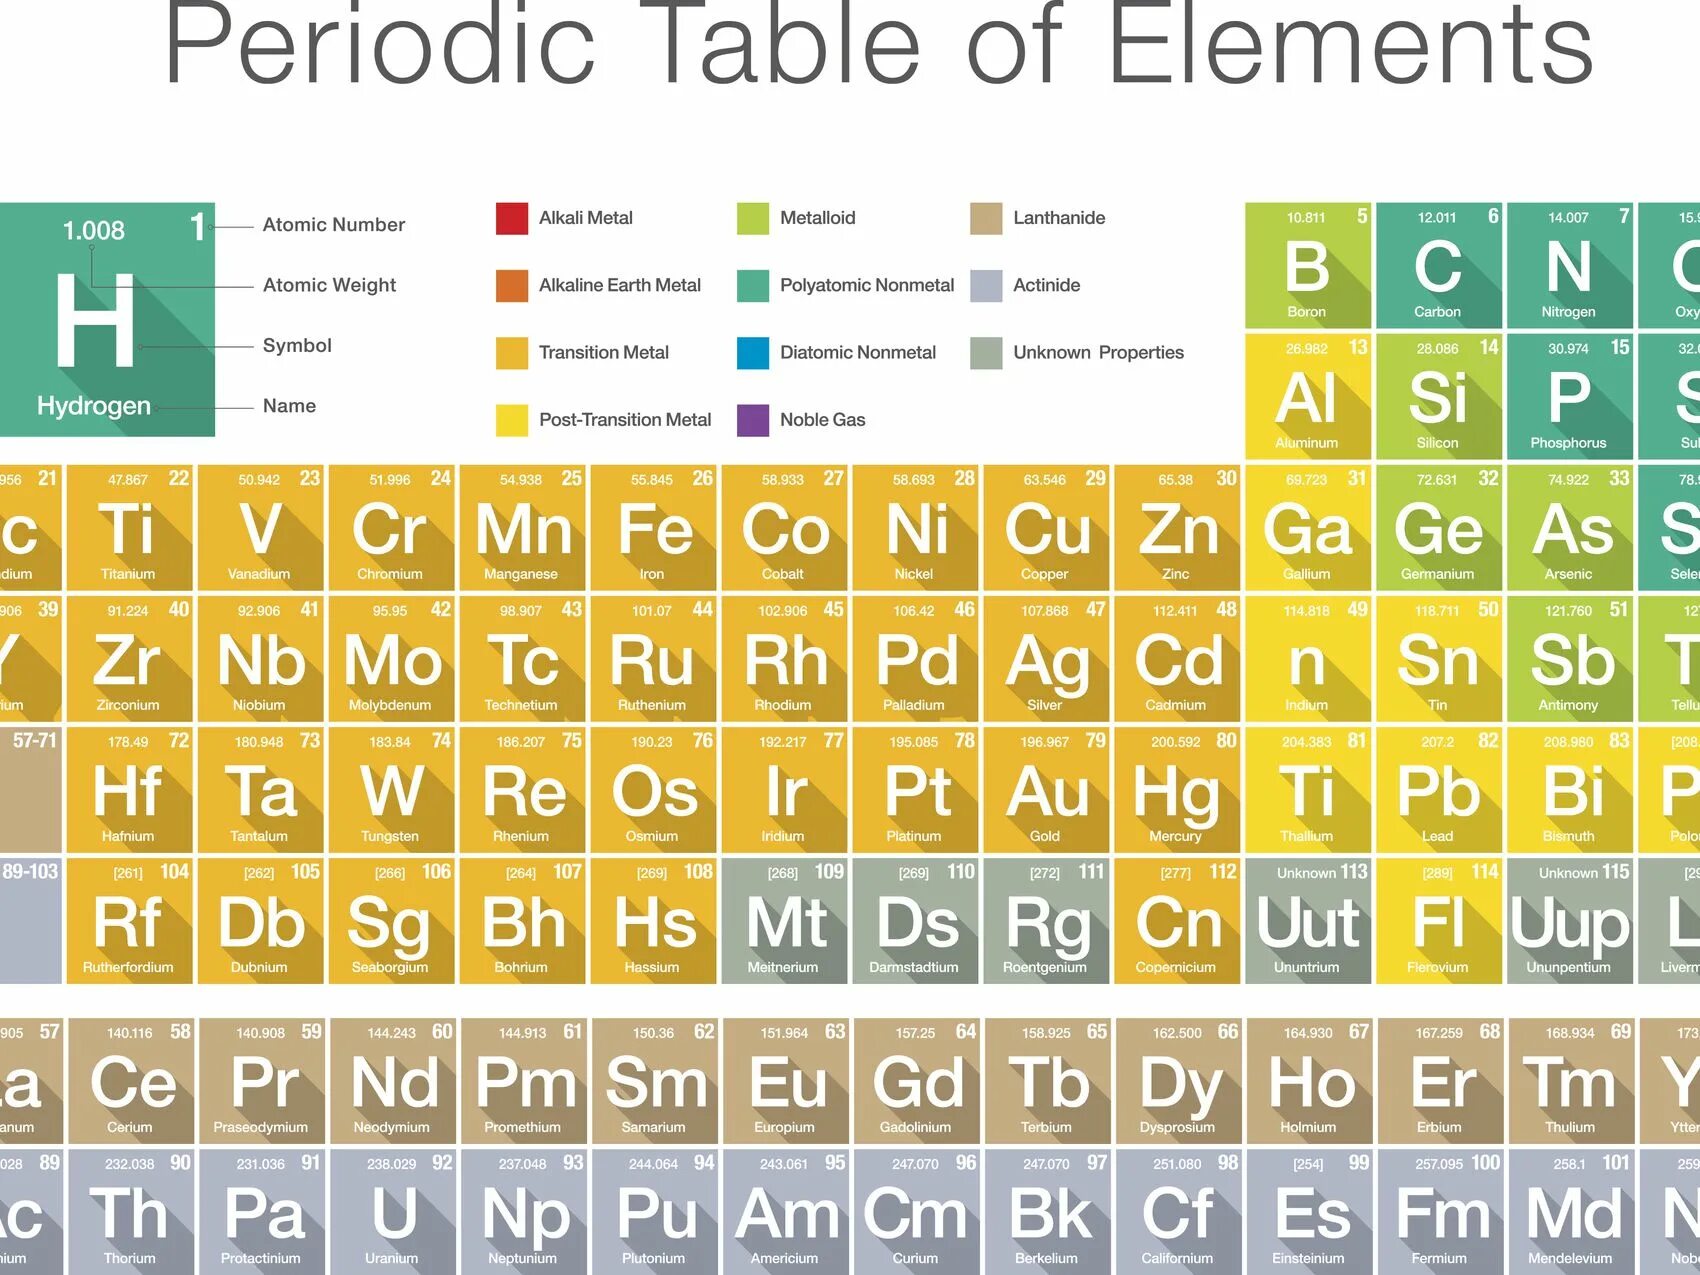 Element meaning. Element a440. Atomic Table.